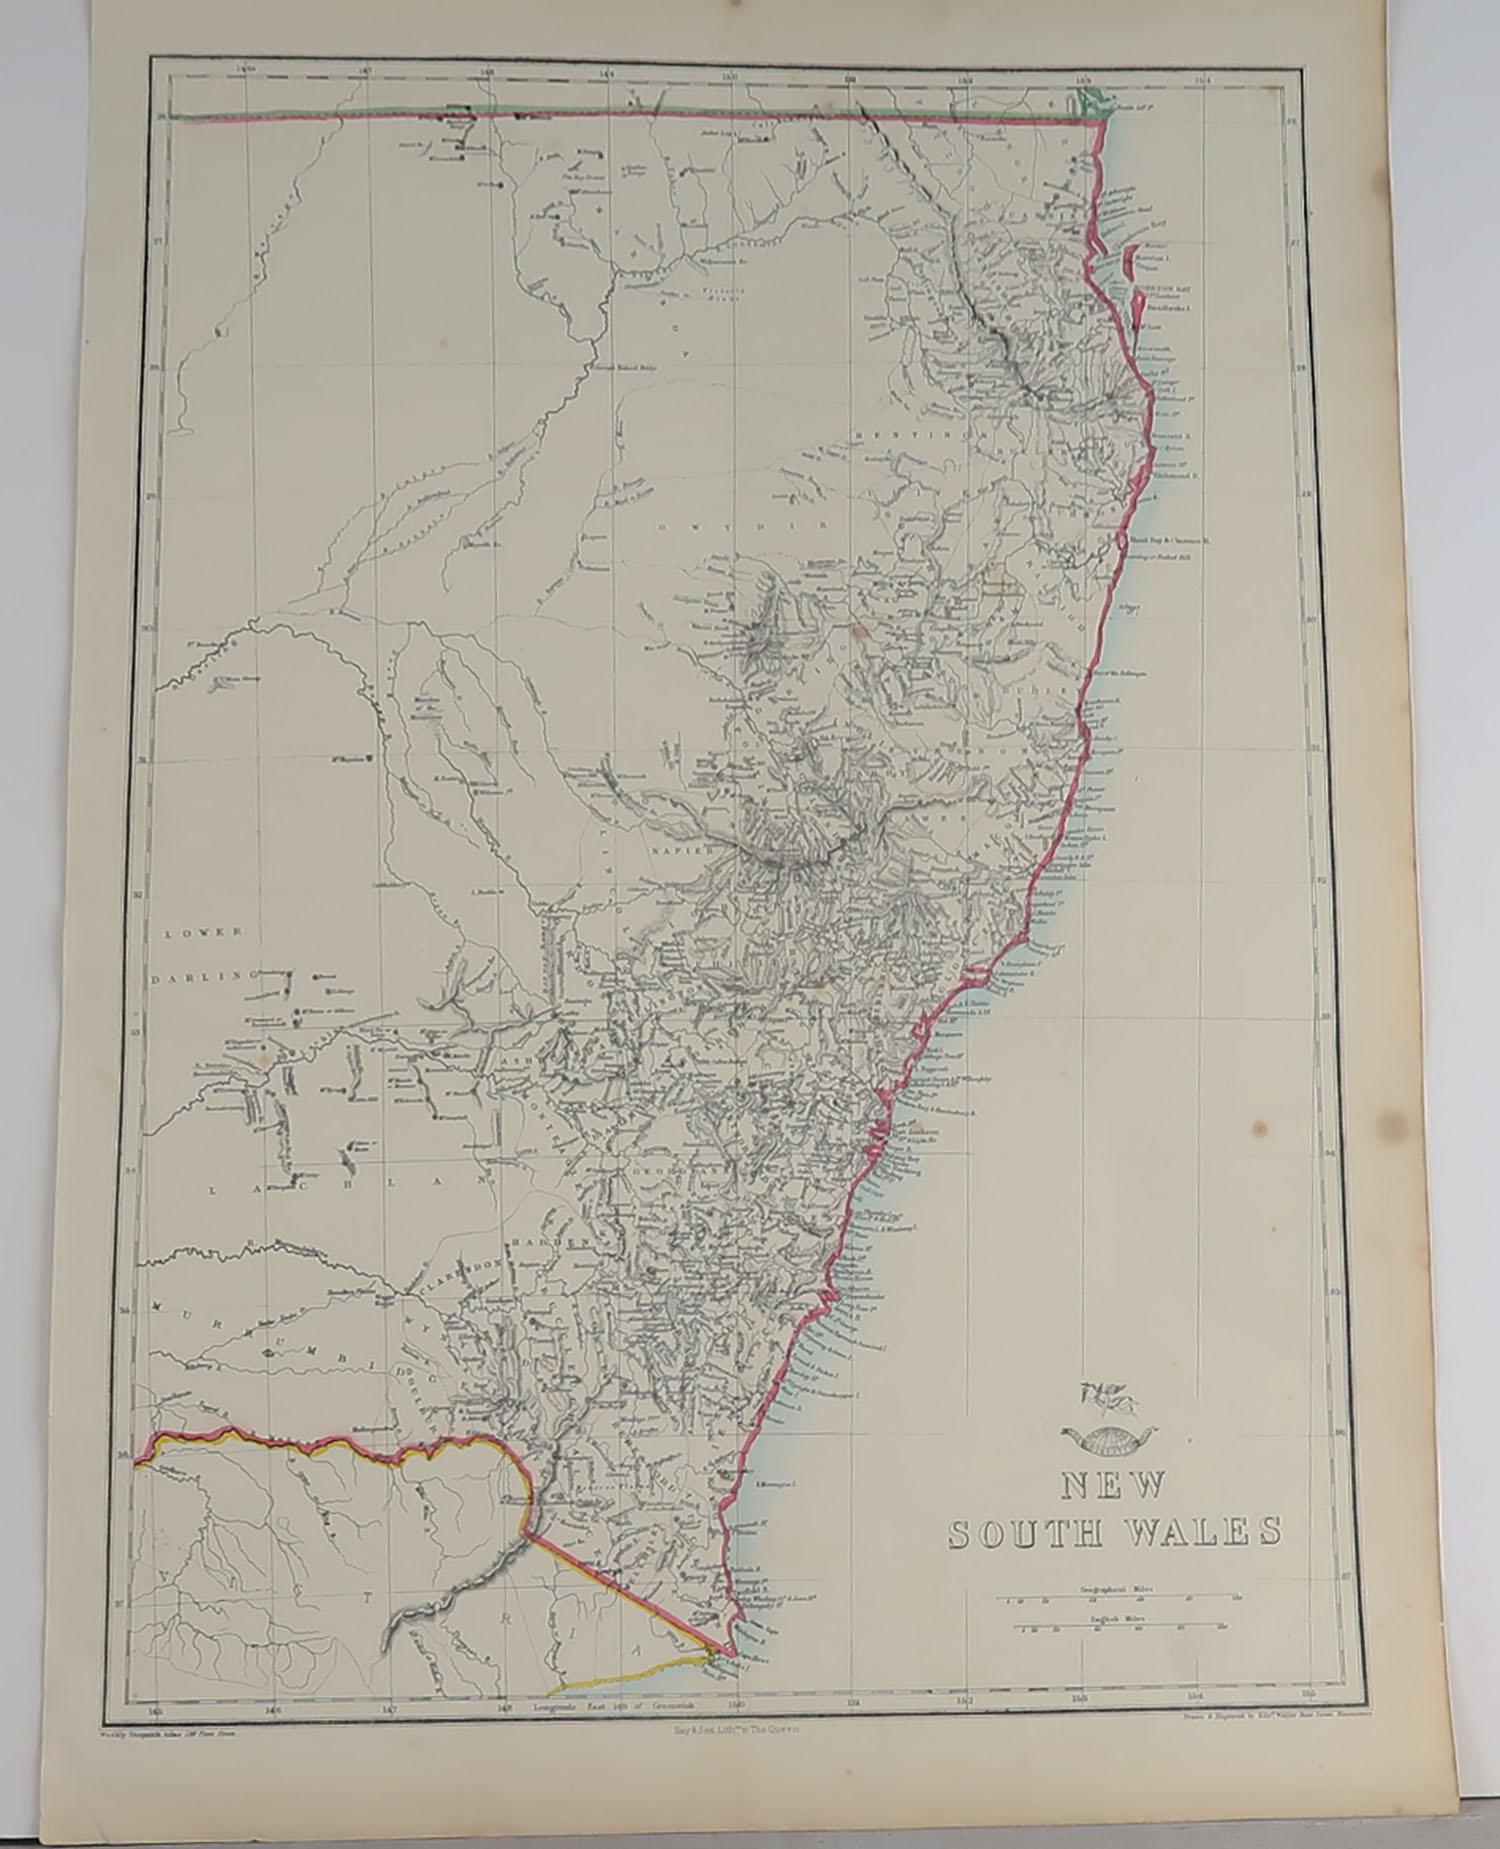 Great map of New South Wales

Drawn and engraved by Edward Weller

Original color outline

Published in The Weekly Dispatch Atlas, 1861

Minor foxing to right margin

Unframed.








 